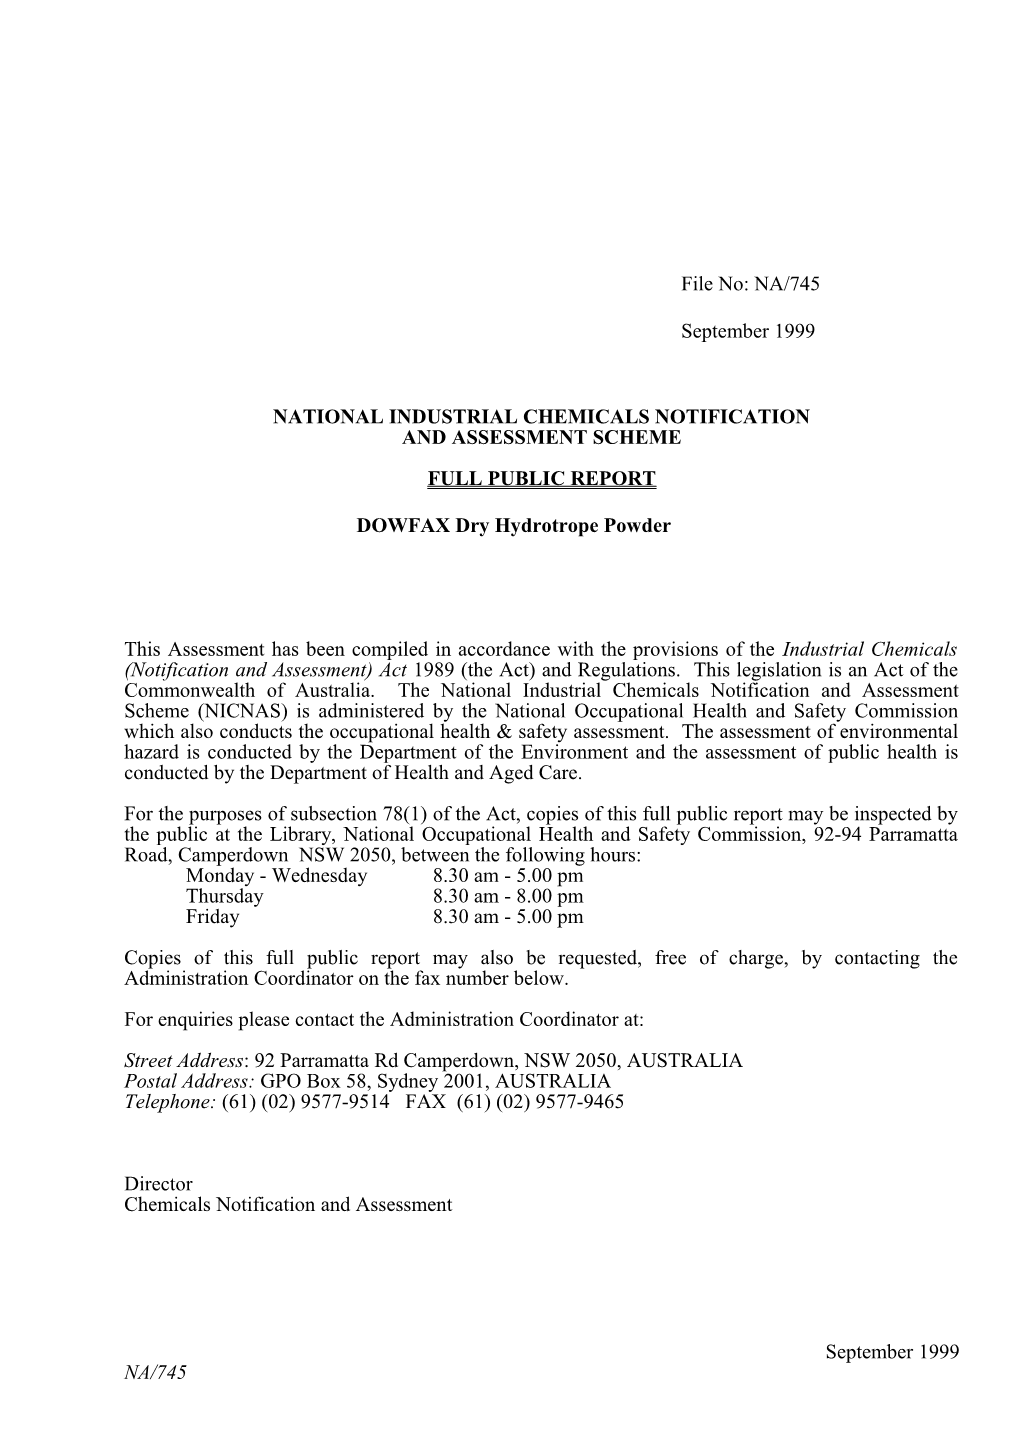 National Industrial Chemicals Notification s13